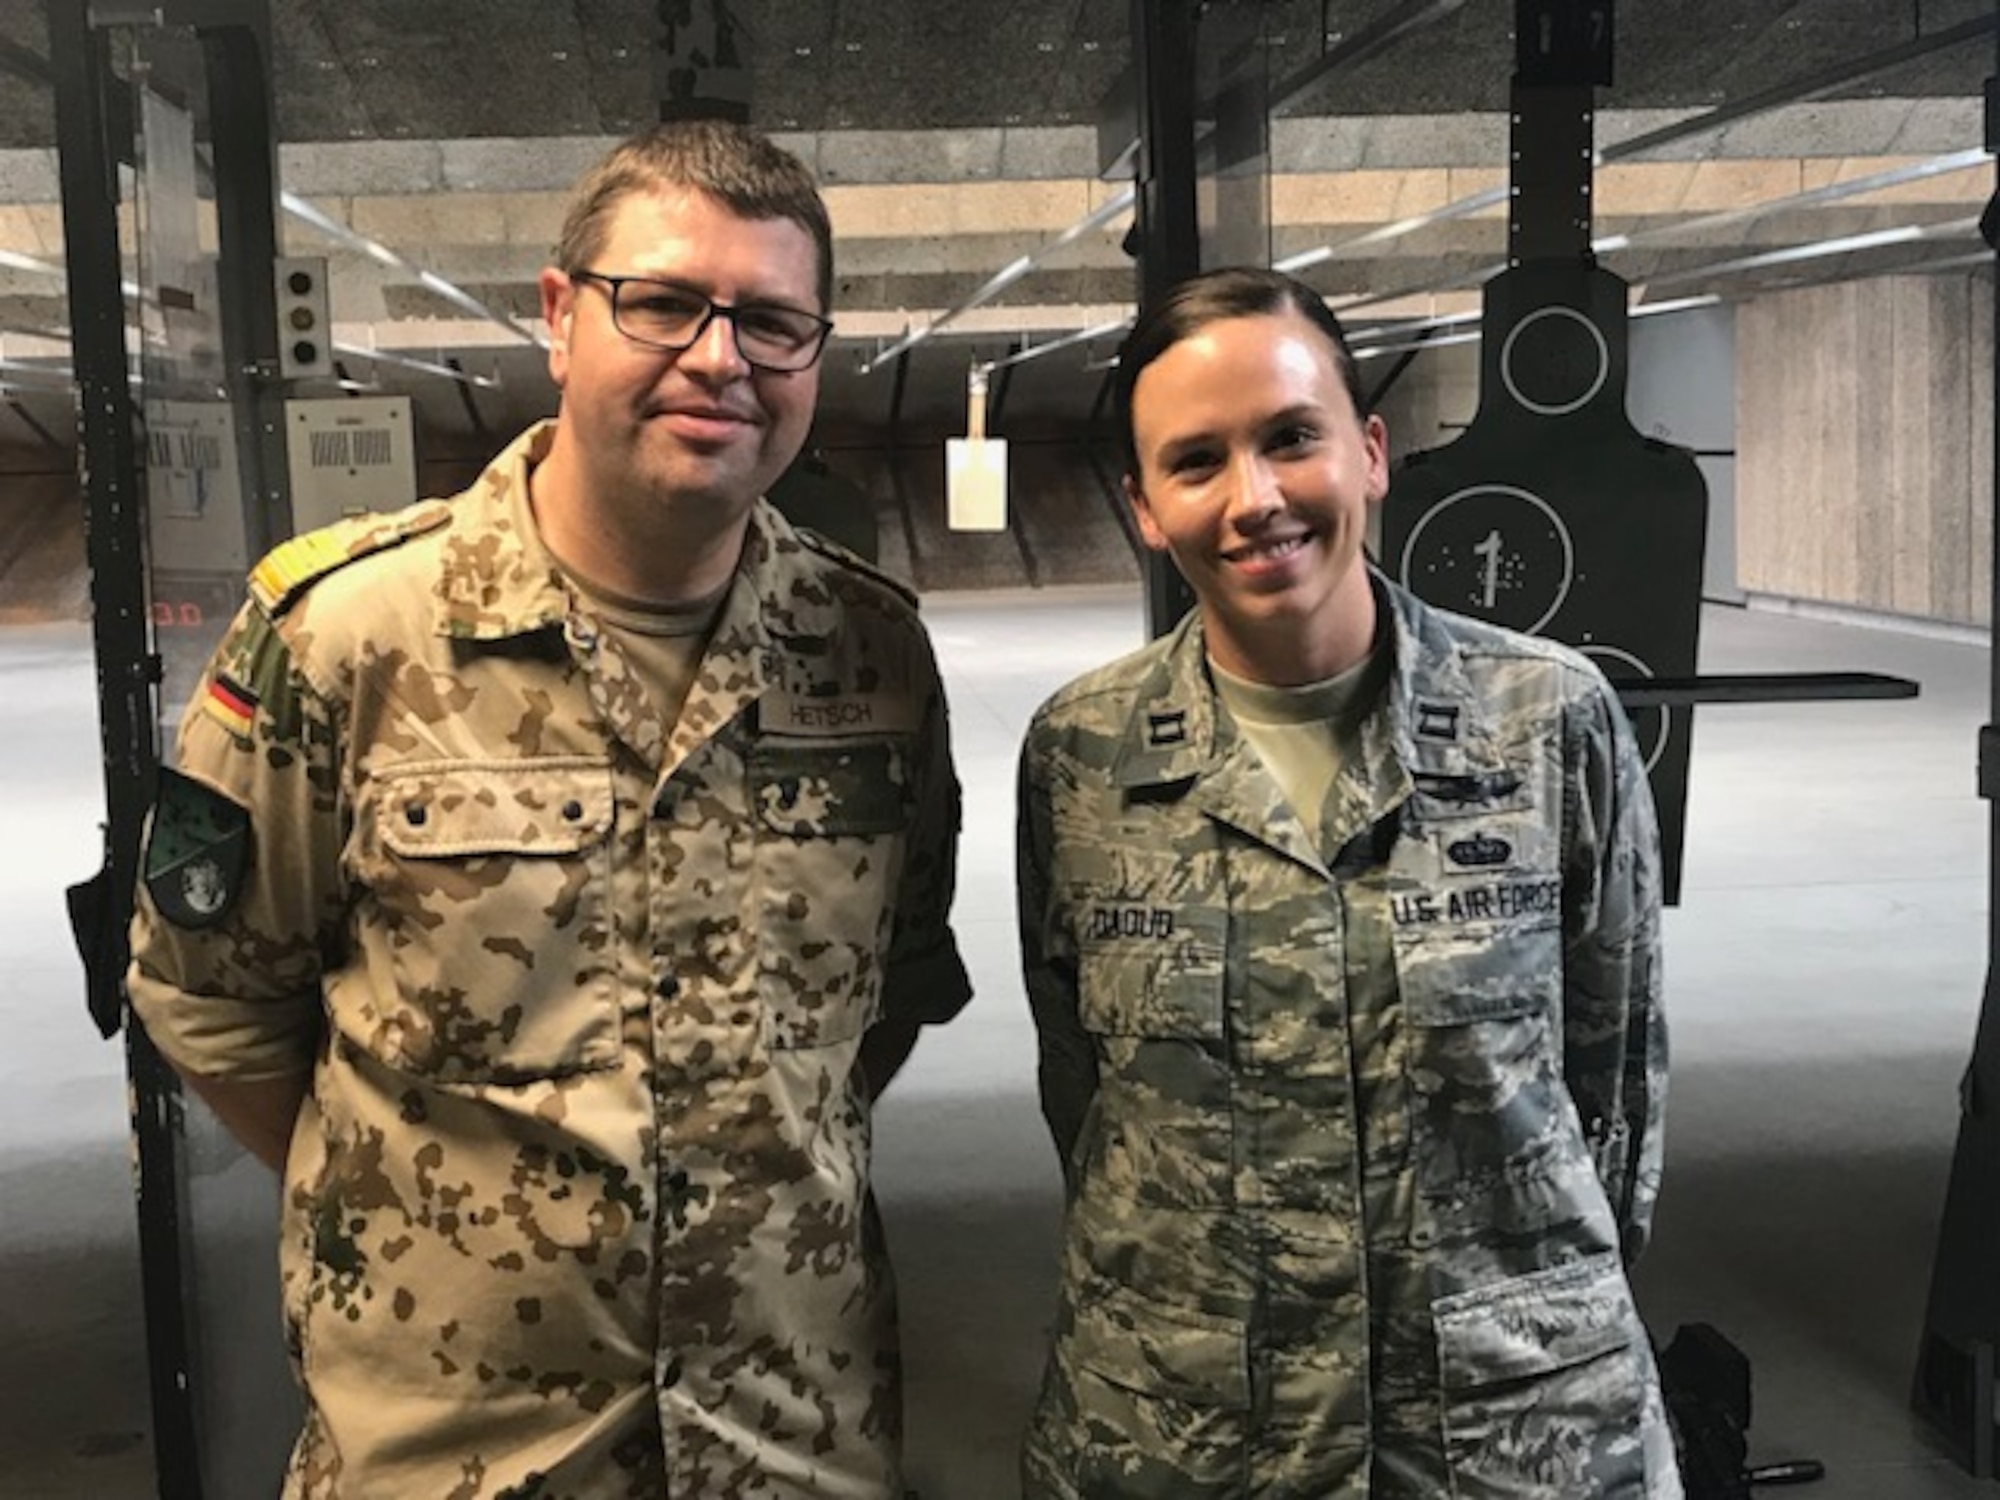 Capt. Randi Daoud, a member with the 178th Wing, hosted Christian Hetsch, a commander with the German Navy, as part of the Military Reserve Exchange Program, June 4-14, 2018 in Springfield, Ohio. Daoud planned an action-packed, two week tour of the National Guard to provide Hetsch with a better understanding of how the United States military operates.